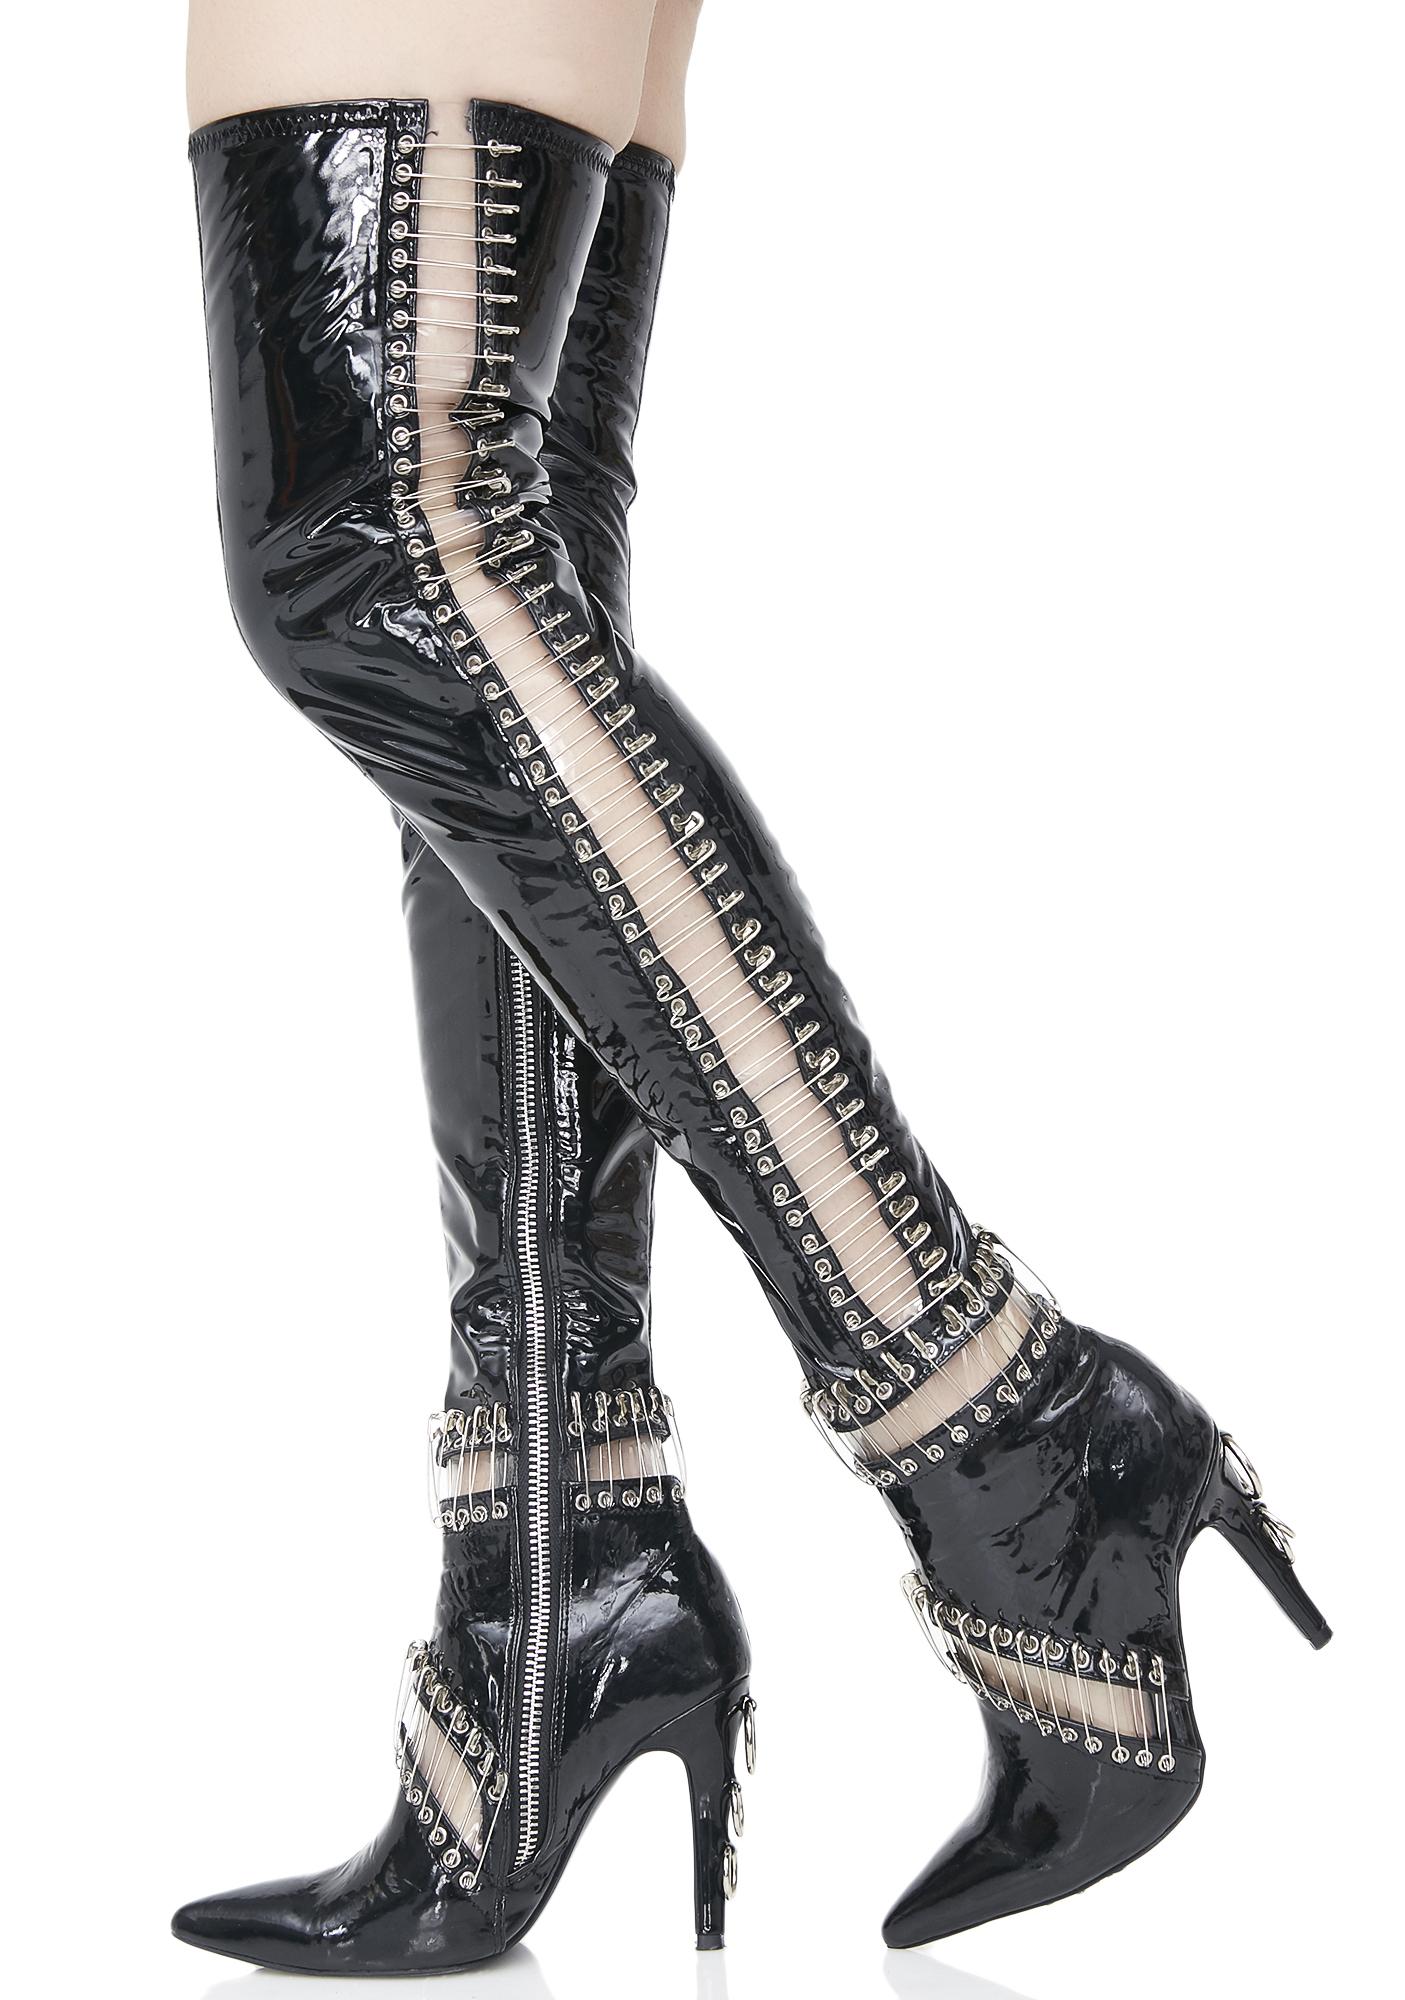 Lightning reccomend Female domination thighhigh boots